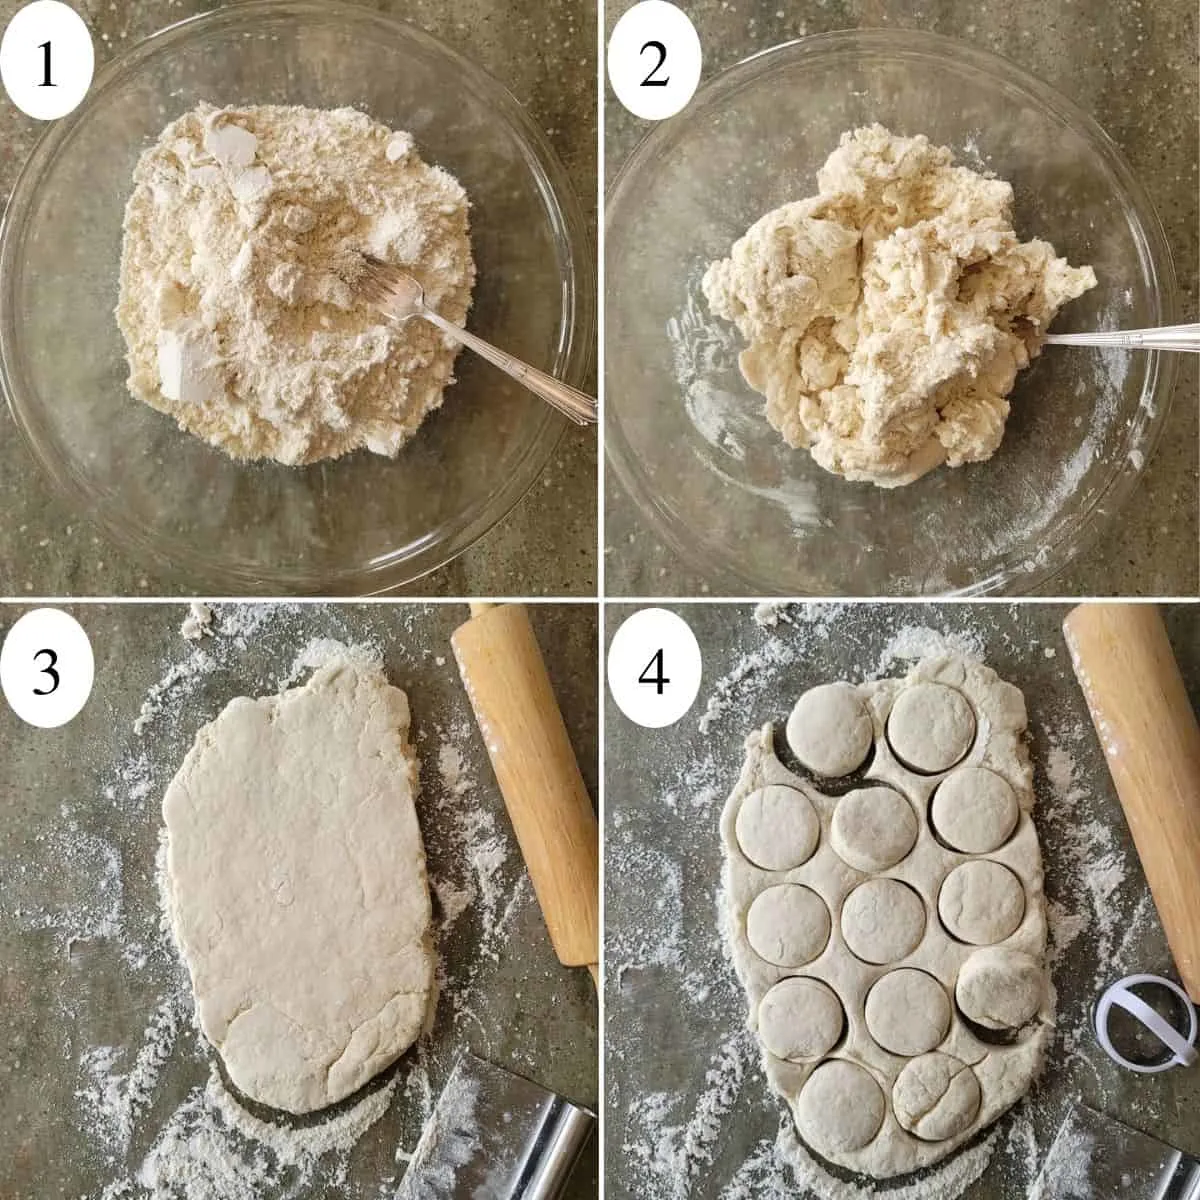 A four image collage showing the first 4 steps to making biscuits.